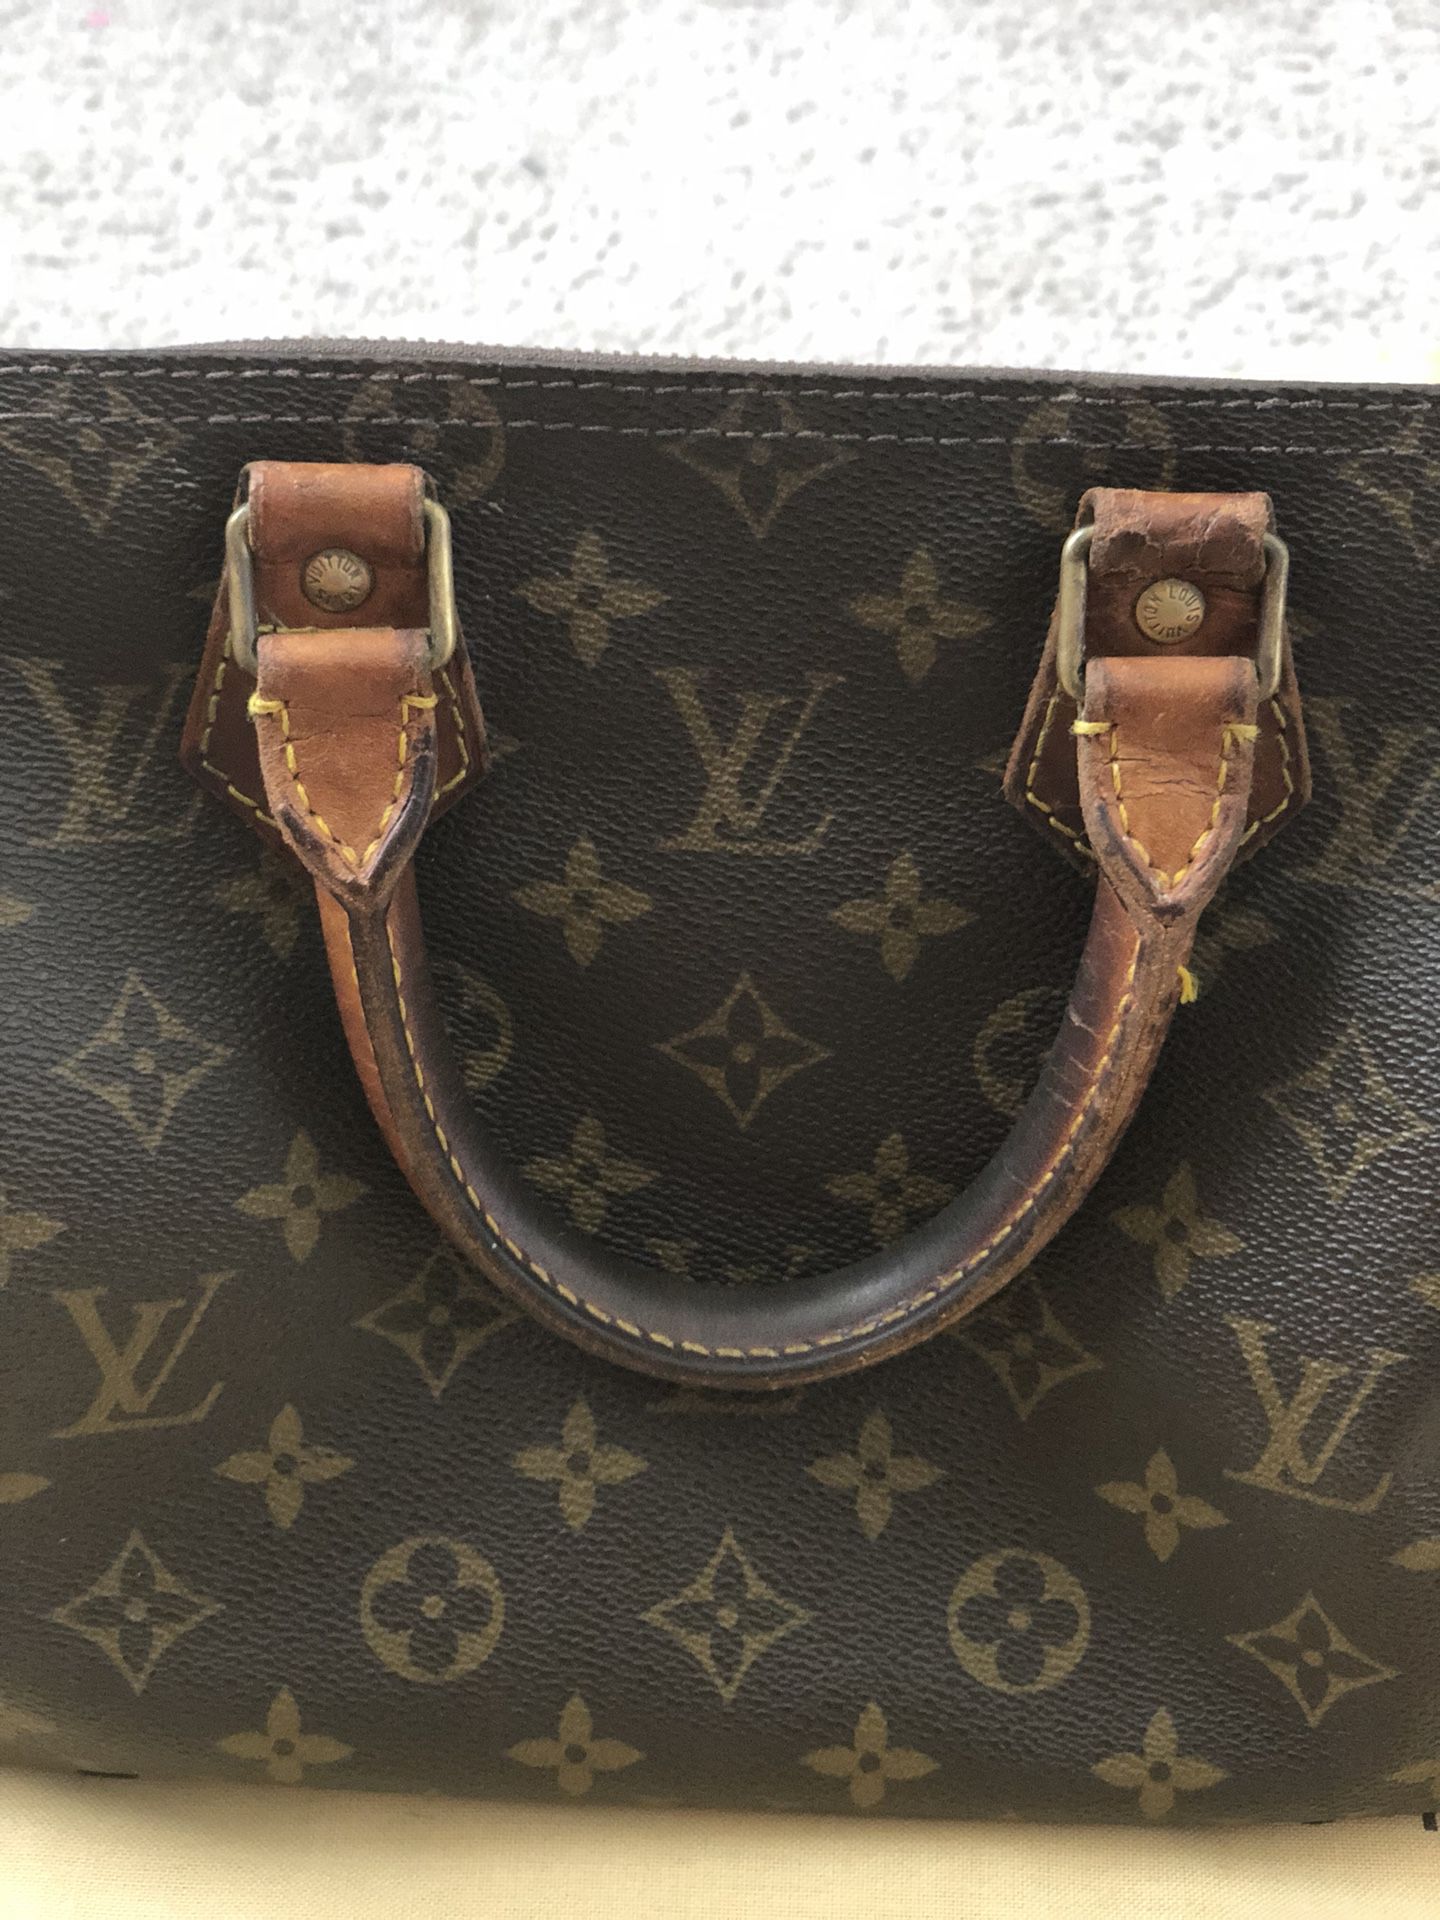 Louis Vuitton Twist Mm 2022 Years With Chip FBE for Sale in Peck Slip, NY -  OfferUp